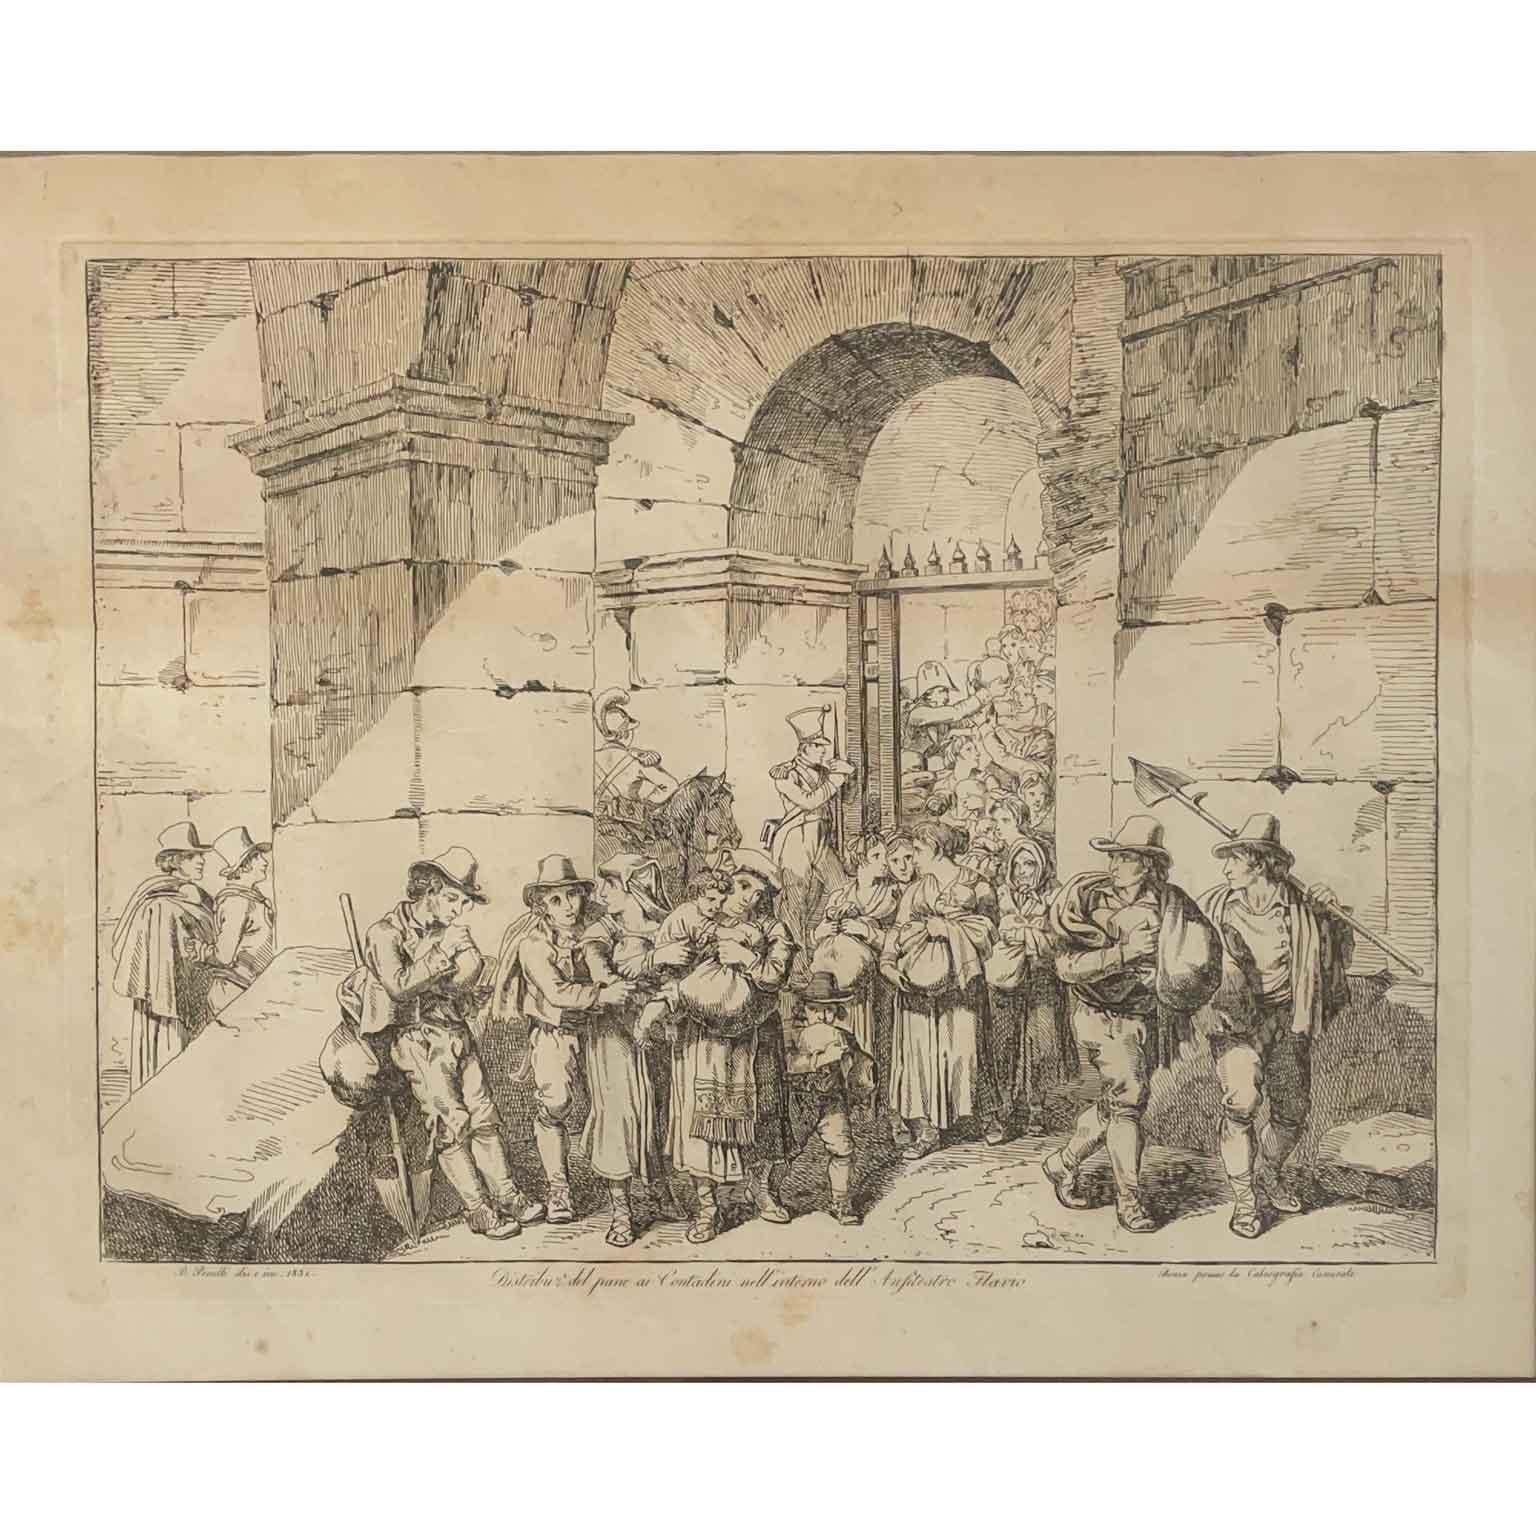 Series of Six Prints with Popular Roman Costumes by Pinelli Bartolomeo dated 1831 Acquaforti reproducing costumes and scenes of popular life in the city of Rome. In good condition, they are presented within brown passepartout with modern frame. The